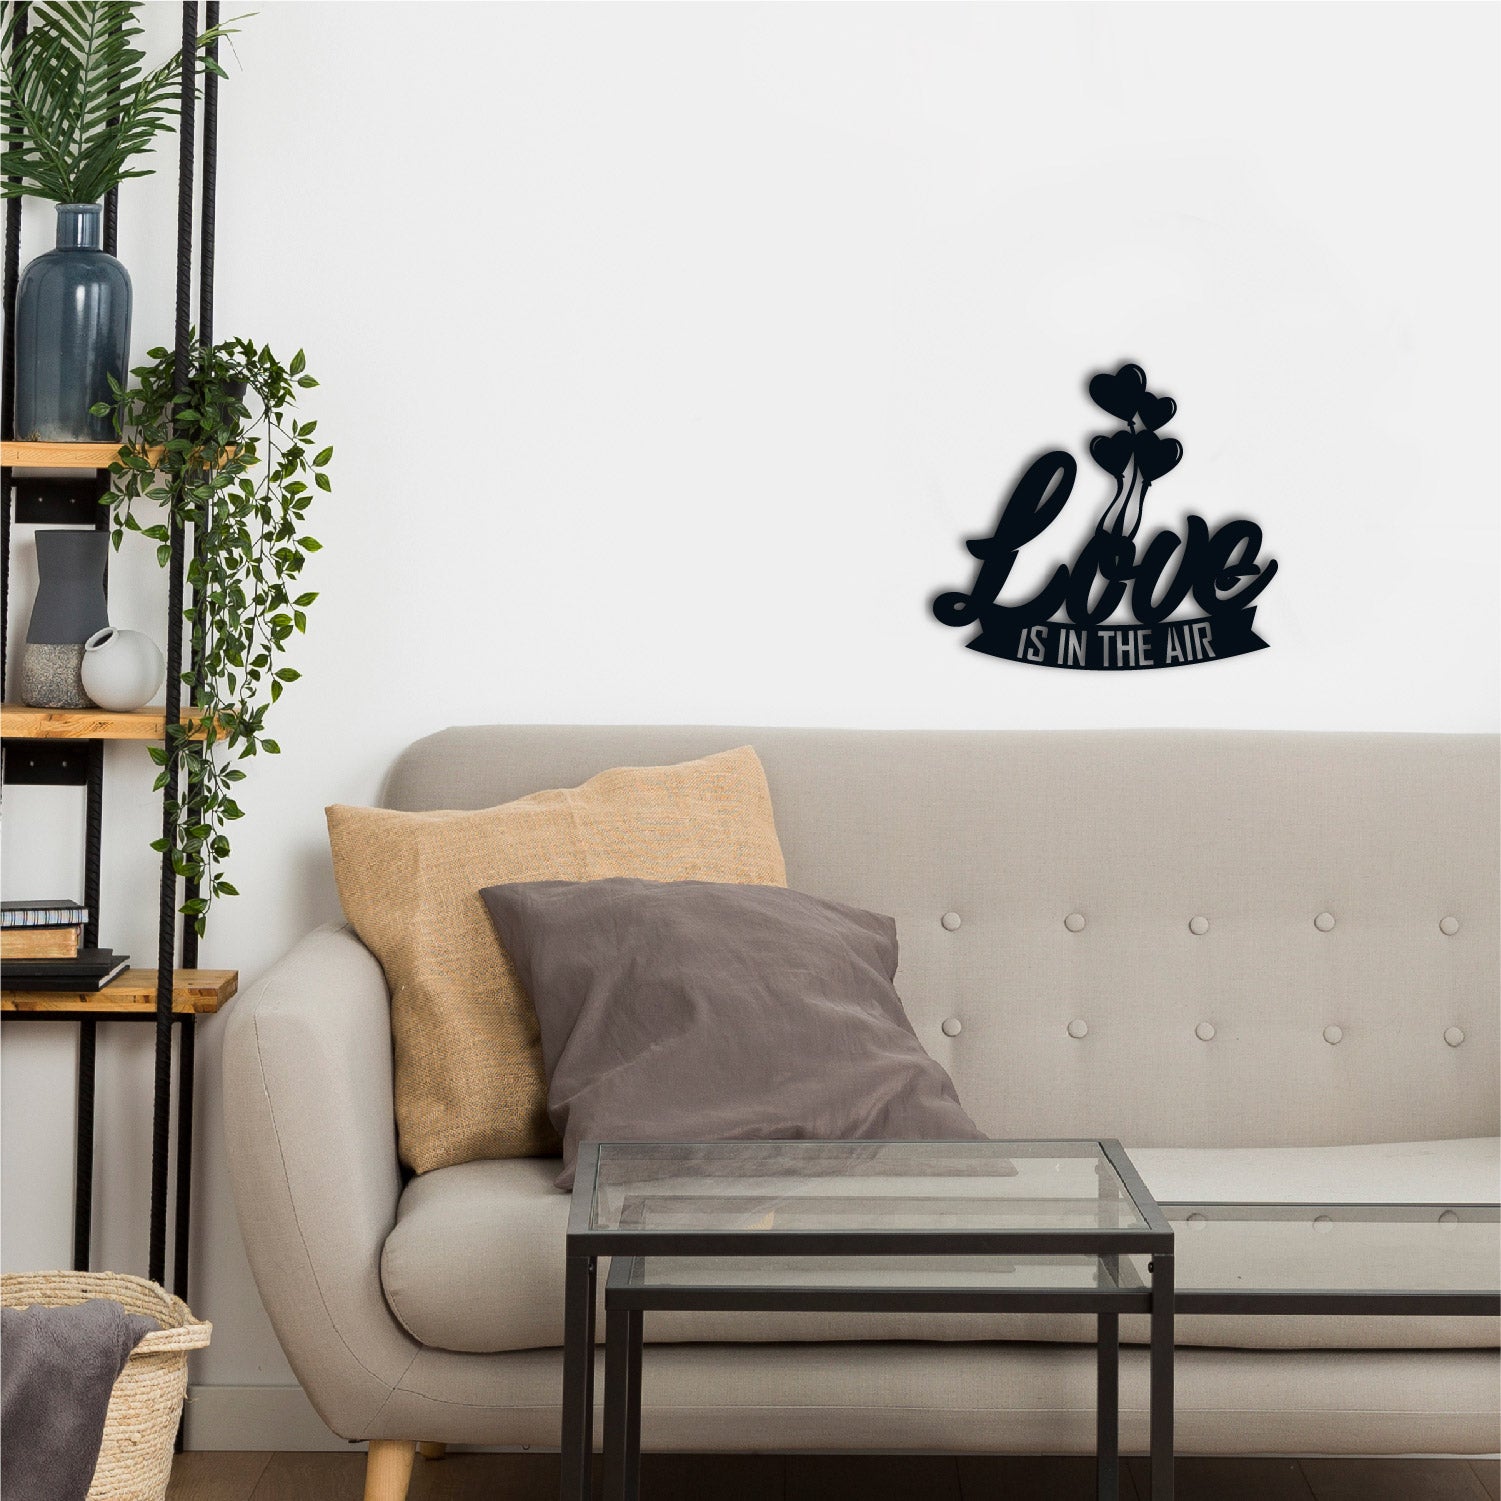 "Love is in the air with Hearth Balloons" Black Engineered Wood Wall Art Cutout, Ready to Hang Home Decor 1